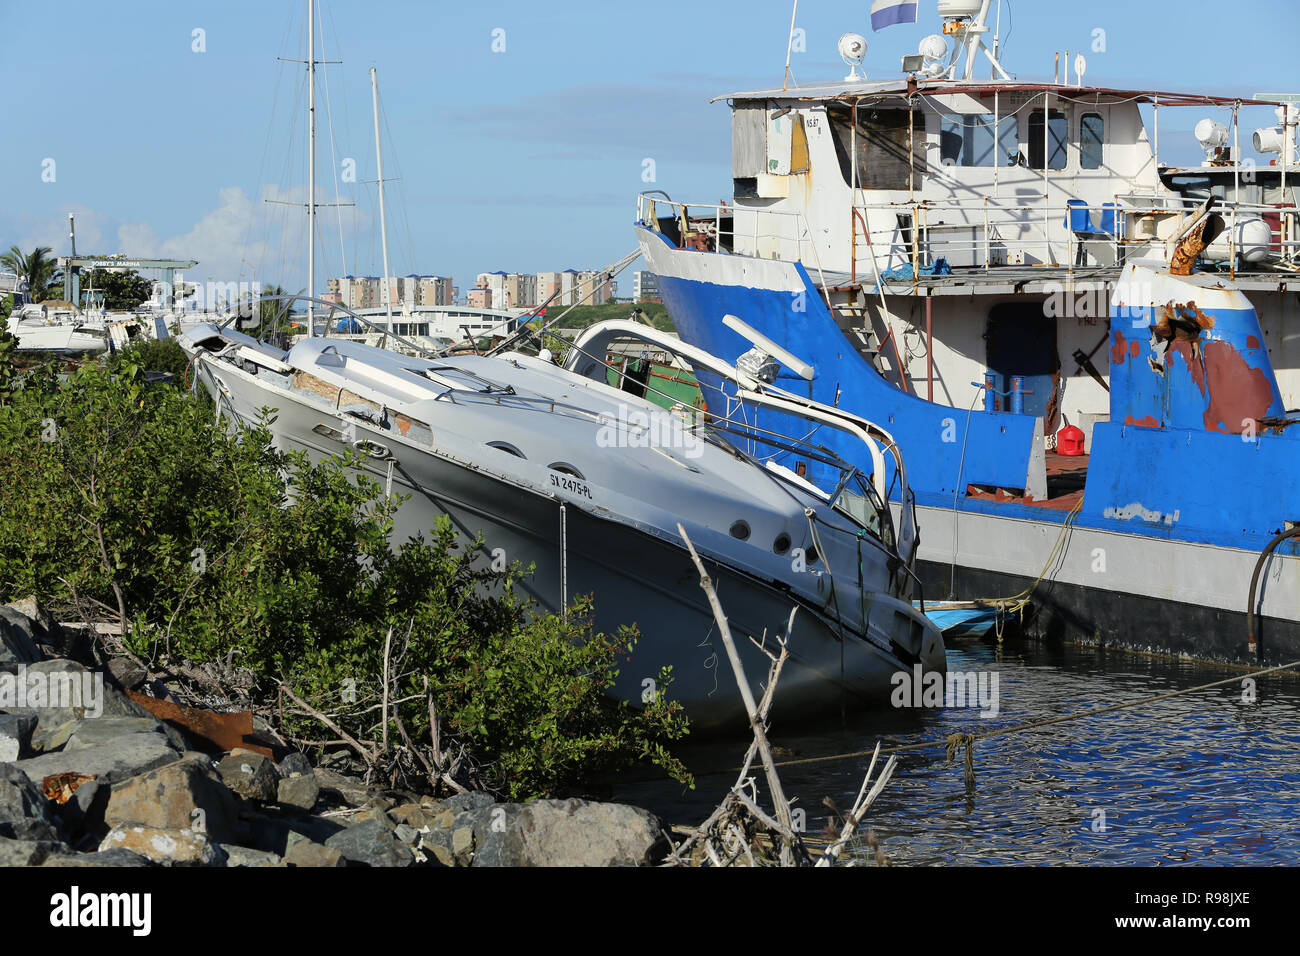 Hurricane Irma wreaked havoc across the eastern Caribbean in 2017 and the evidence is still visible on the waters of Sint Maarten in late 2018 Stock Photo